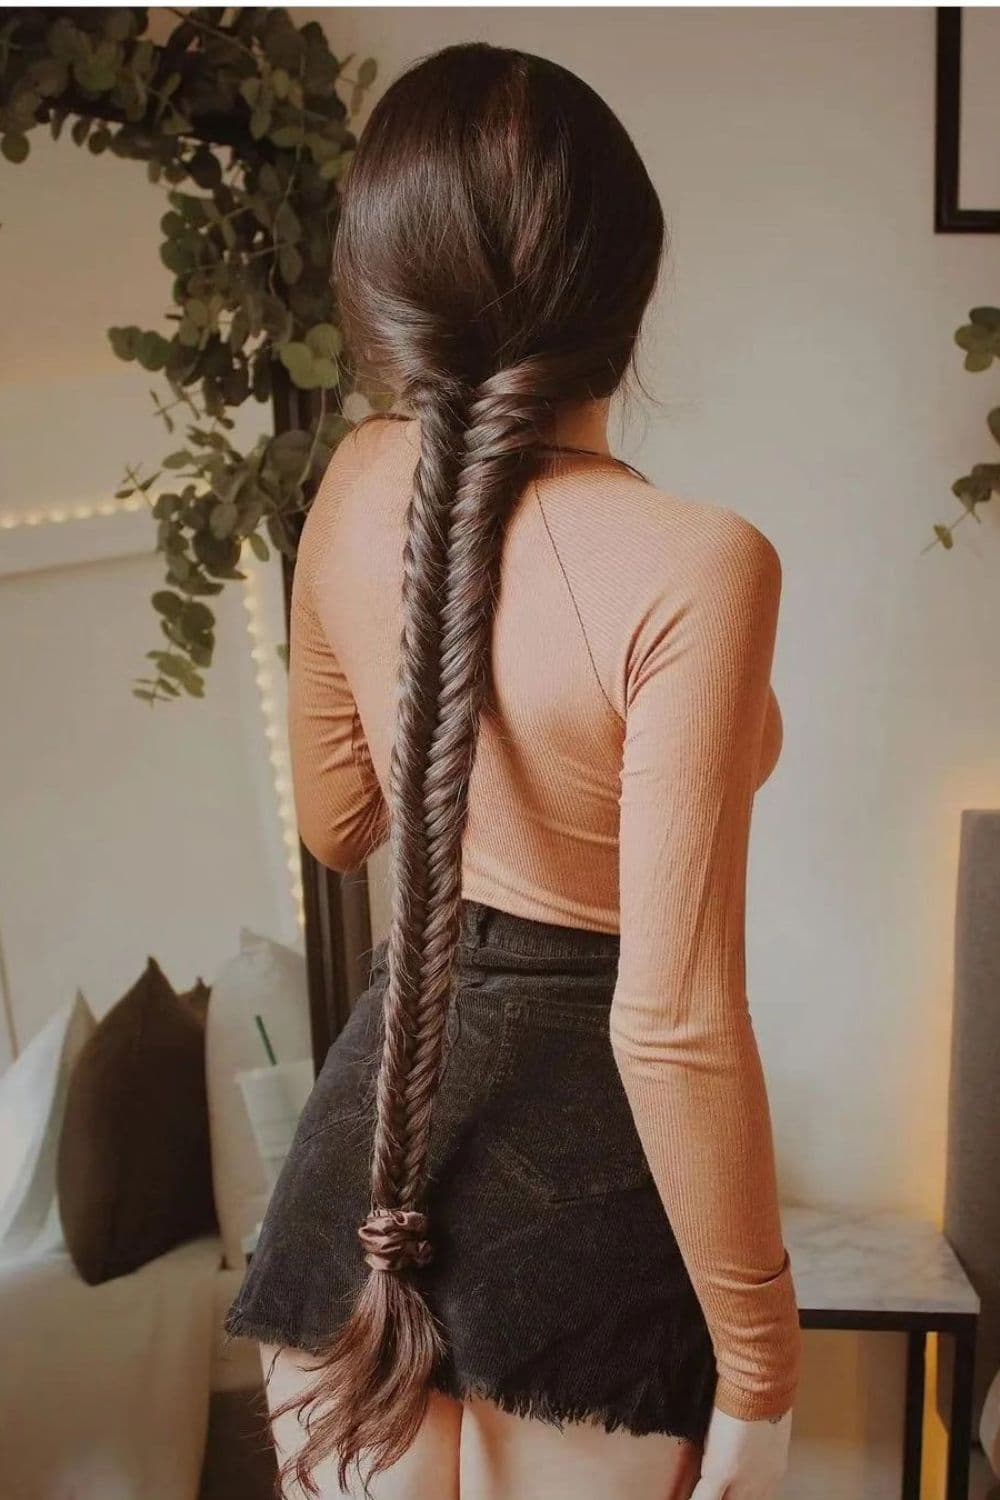 A woman standing with a black fishtail ponytail.